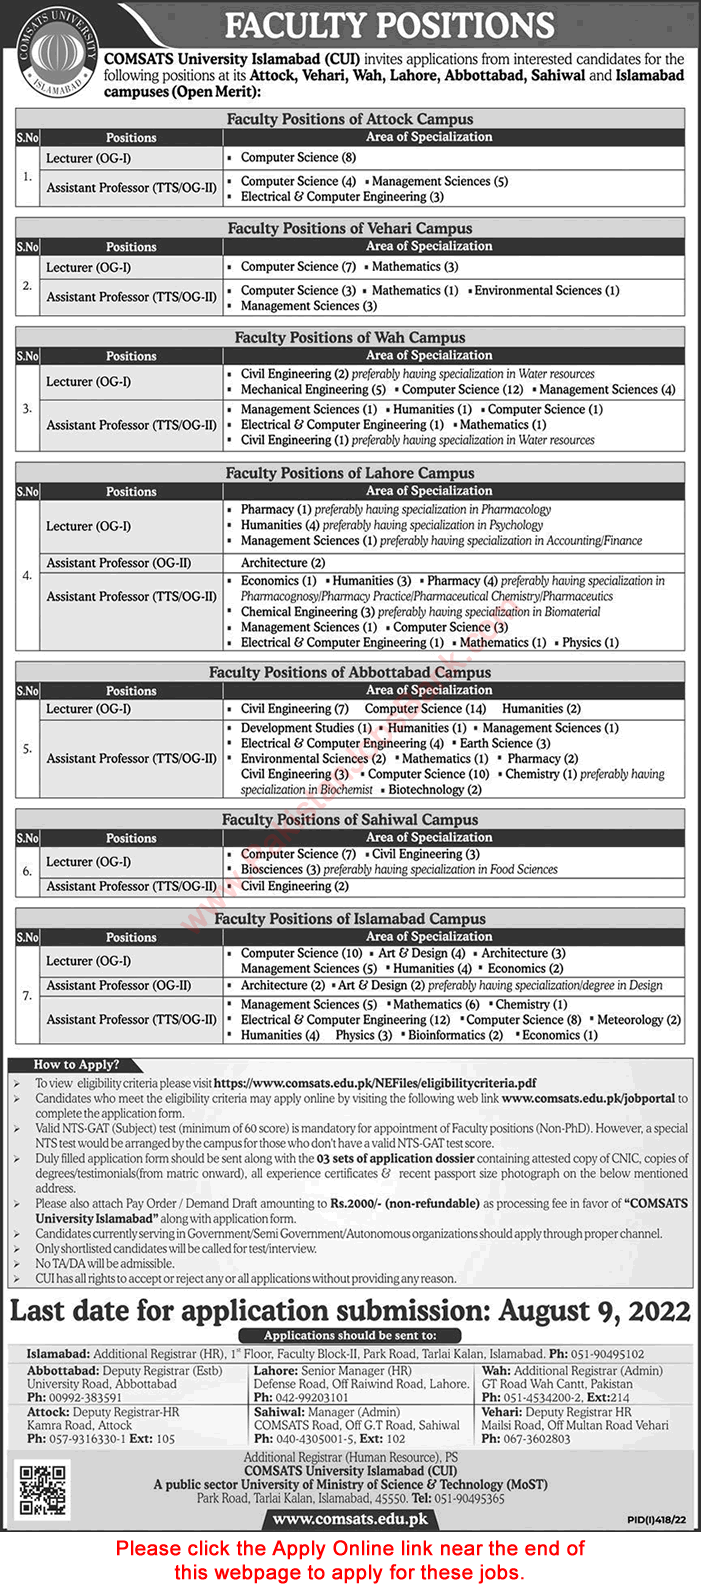 Teaching Faculty Jobs in COMSATS University 2022 July CUI Apply Online Lecturers / Assistant Professors Latest